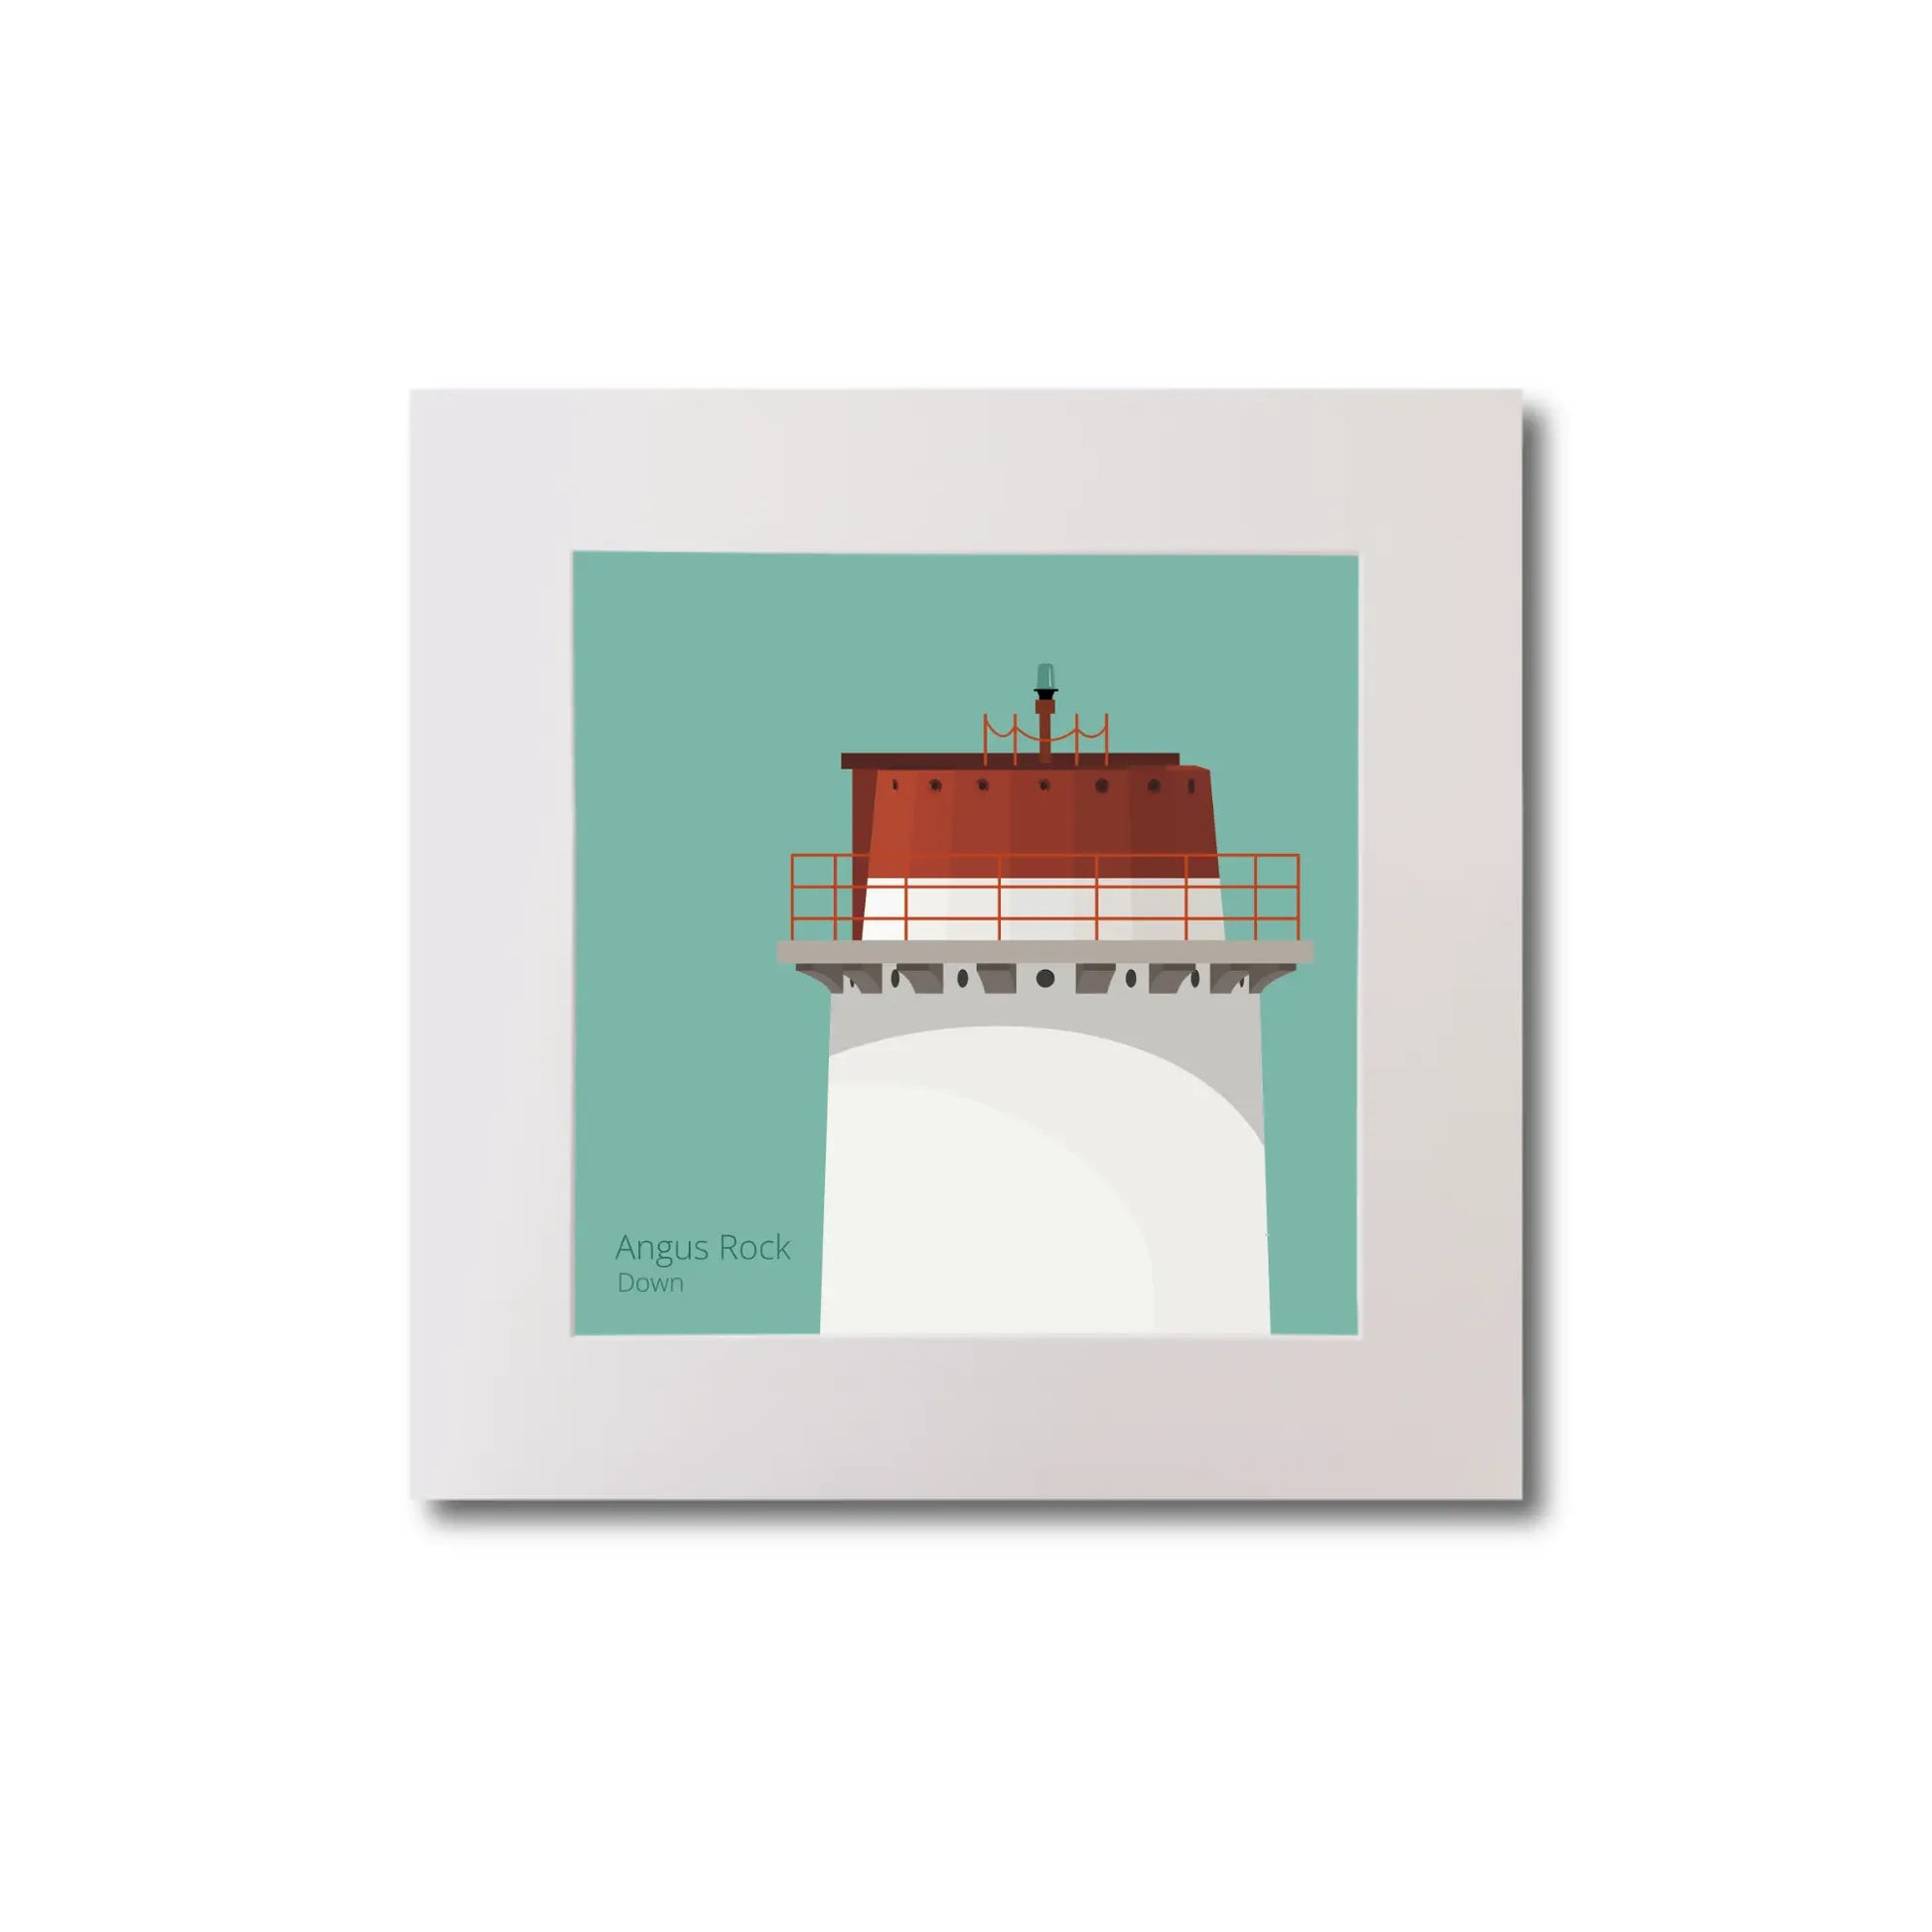 Illustration Angus Rock lighthouse on an ocean green background, mounted and measuring 20x20cm.